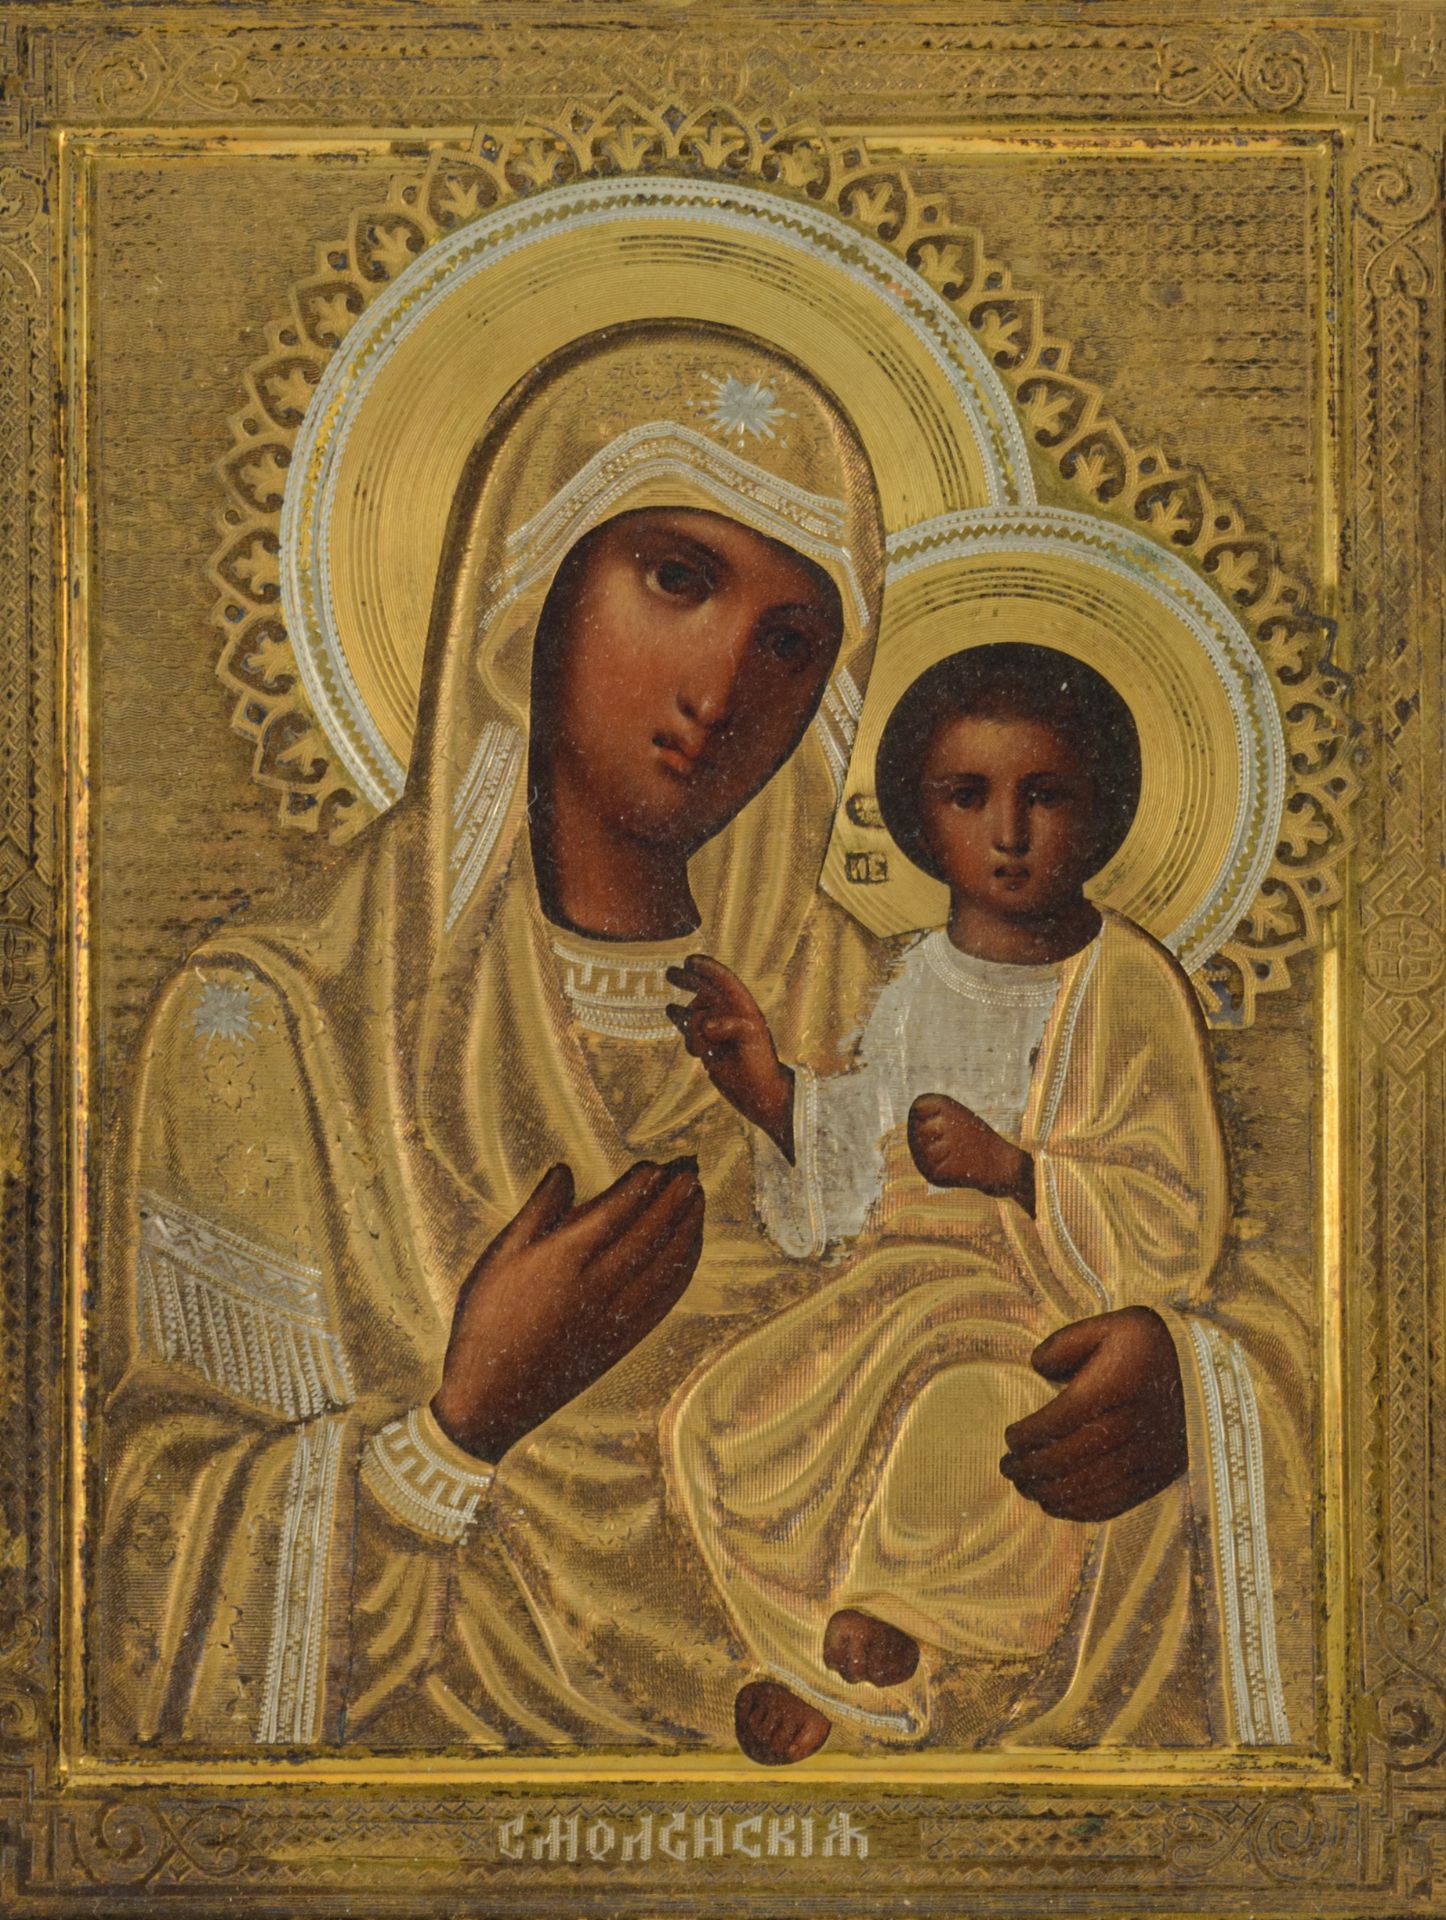 An Eastern European travel icon, depicting the Holy Mother and Child, with silver Reza, 25 x 38 cm